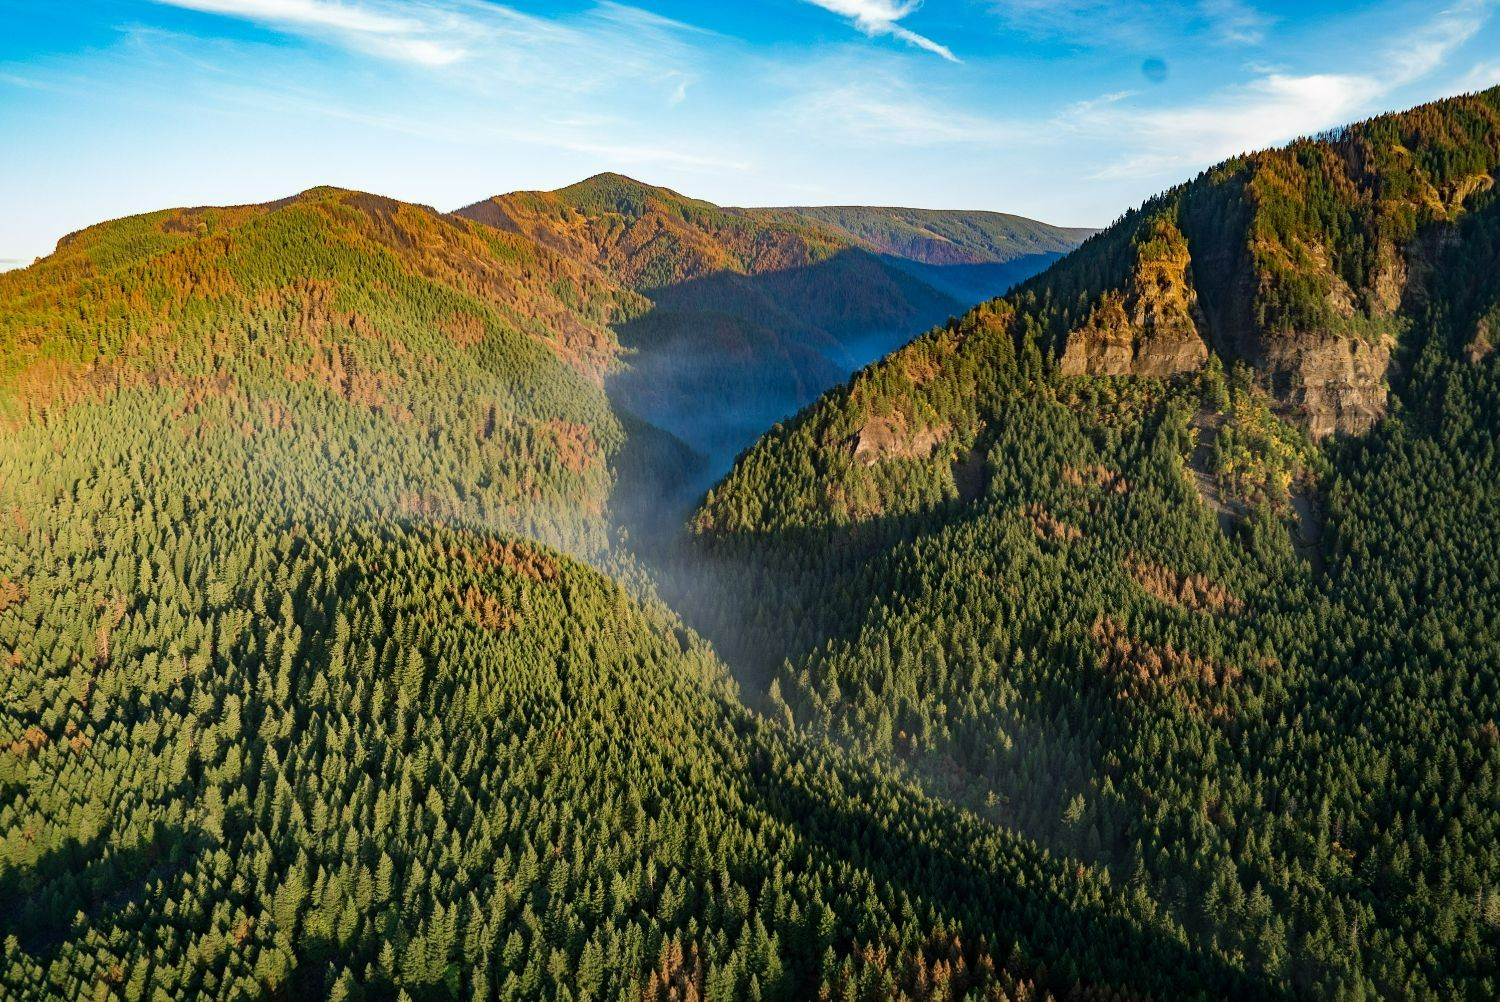 Image shows a mountain valley, the area of the Eagle Creek fire, covered in green and gold evergreen trees beneath a cloudy blue sky.